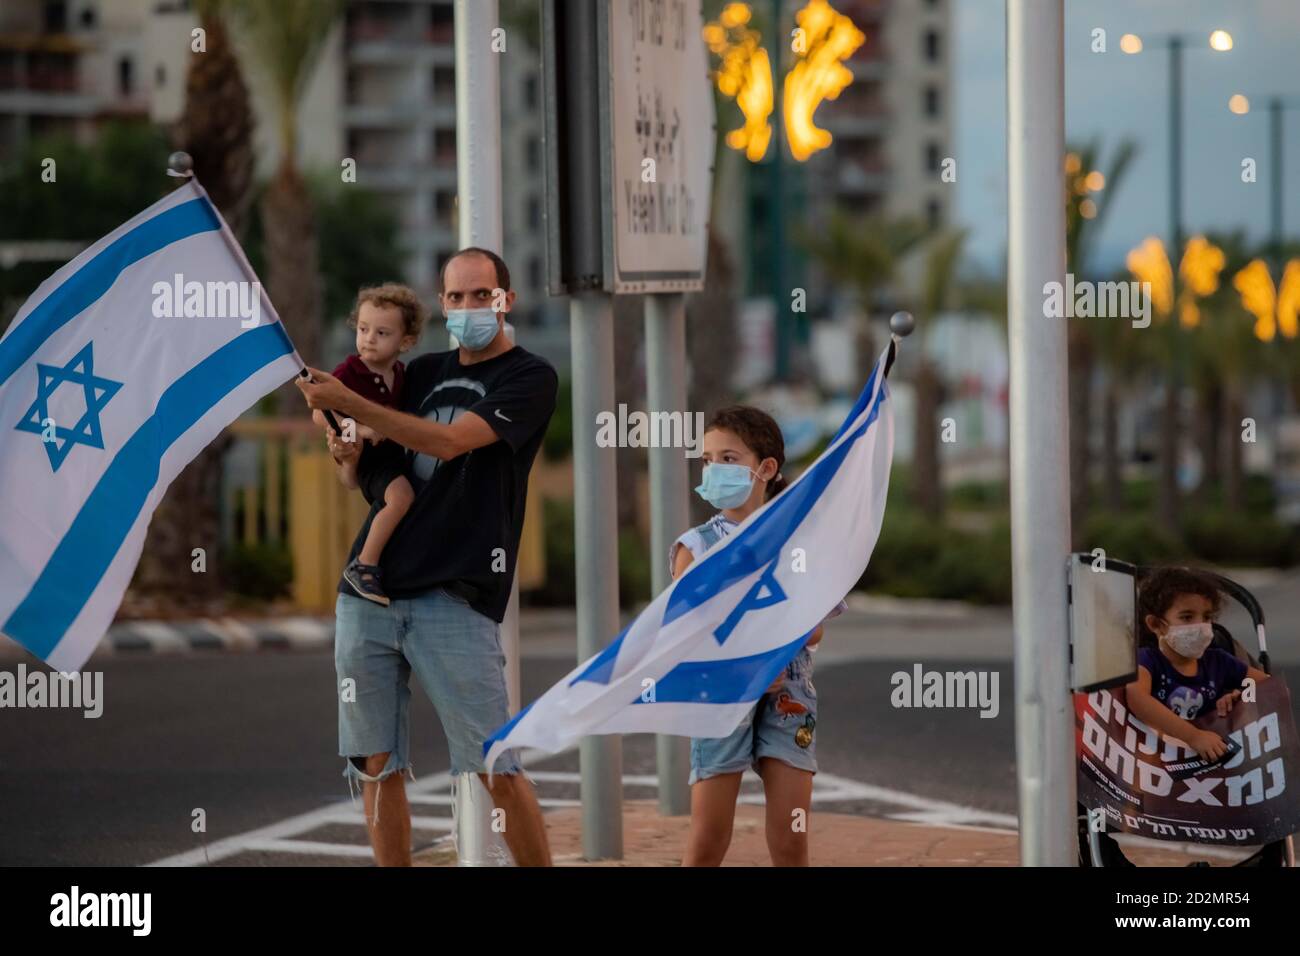 Protesters,protes,demonstration,protest,protesting,crimes,crime minister,crime,bribe,bribery,bloated,government,corruption,mis management,mismanagement,dictatorship,dictator,state,Prime Minister,Benjamin,Bibi,Netanyahu,Israel,Israeli,2020,middle east,patriot,patriots,black flag movement,demonstrator,demonstrators,people,placard,protester,flag,freedom,protection,banner,activist,patriotic,activism,public,national,political,country,rally,movement,culture,mask,democracy,action,holding,politics,woman,march,crisis,protests Stock Photo